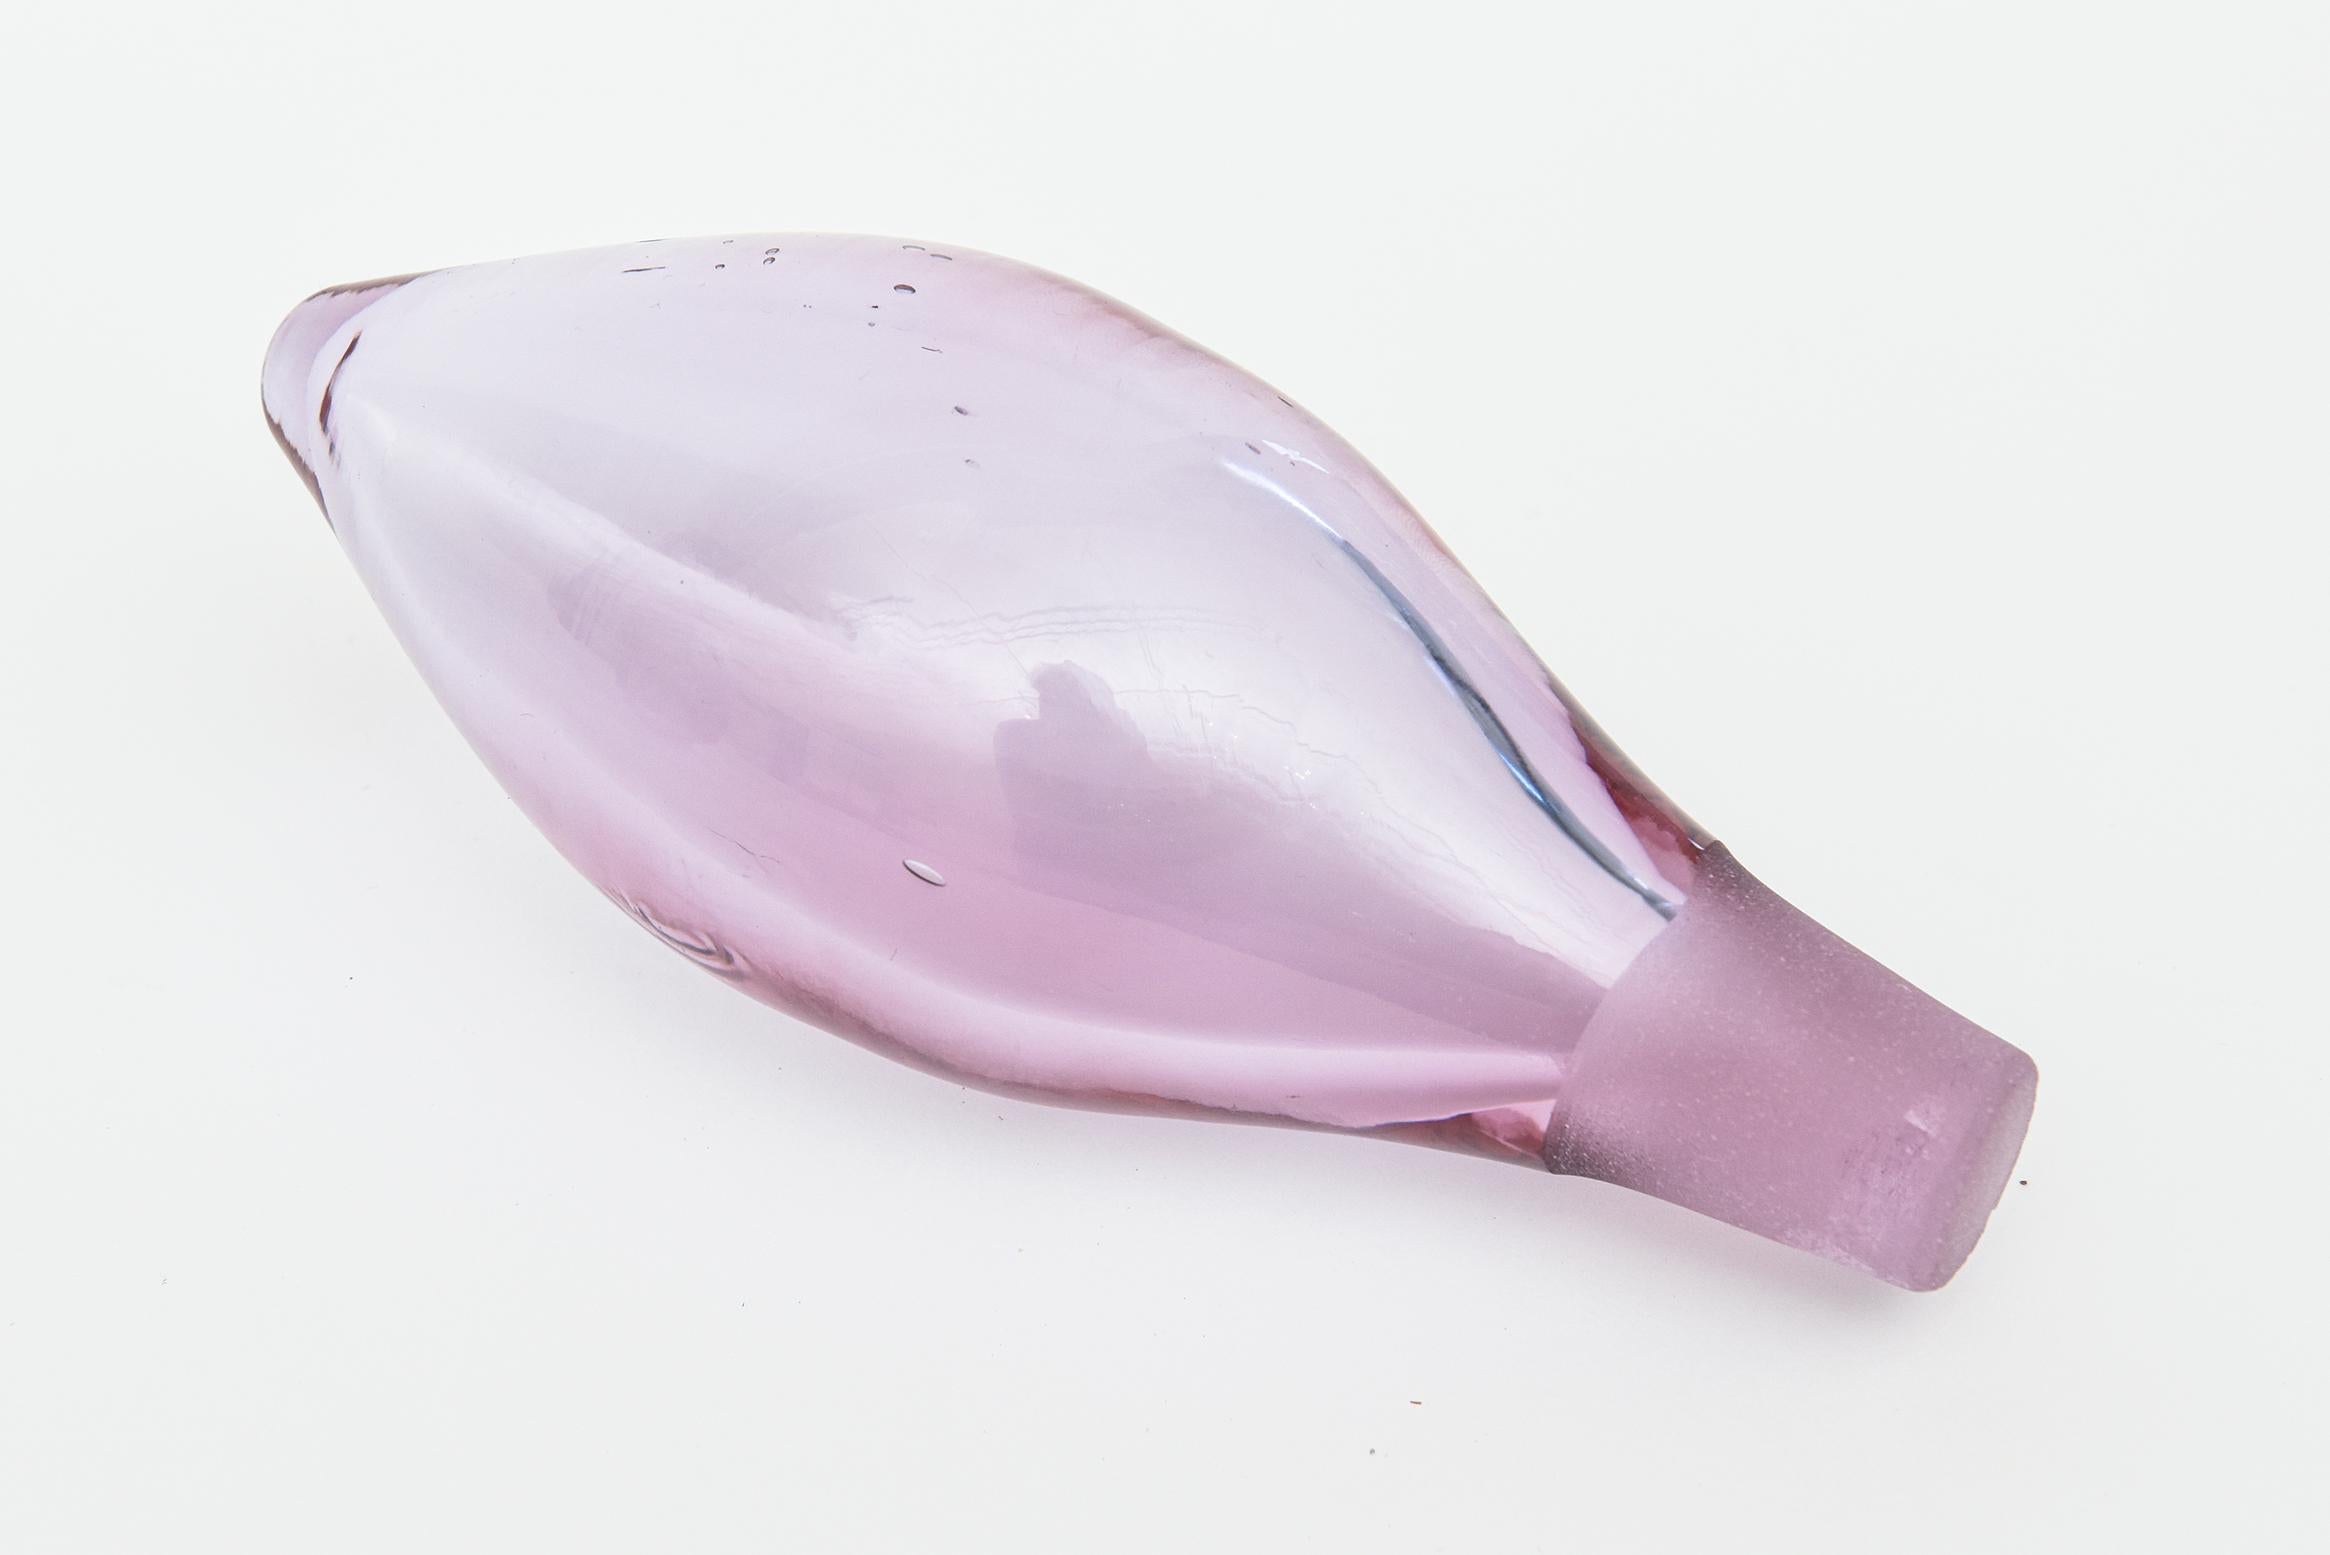 This lovely vintage molded glass decanter bottle by Blenko has a teardrop original long stopper. The design on the front and back are abstract bodies and forms that are raised from the molded glass. It is a light purple of a luscious color wave.